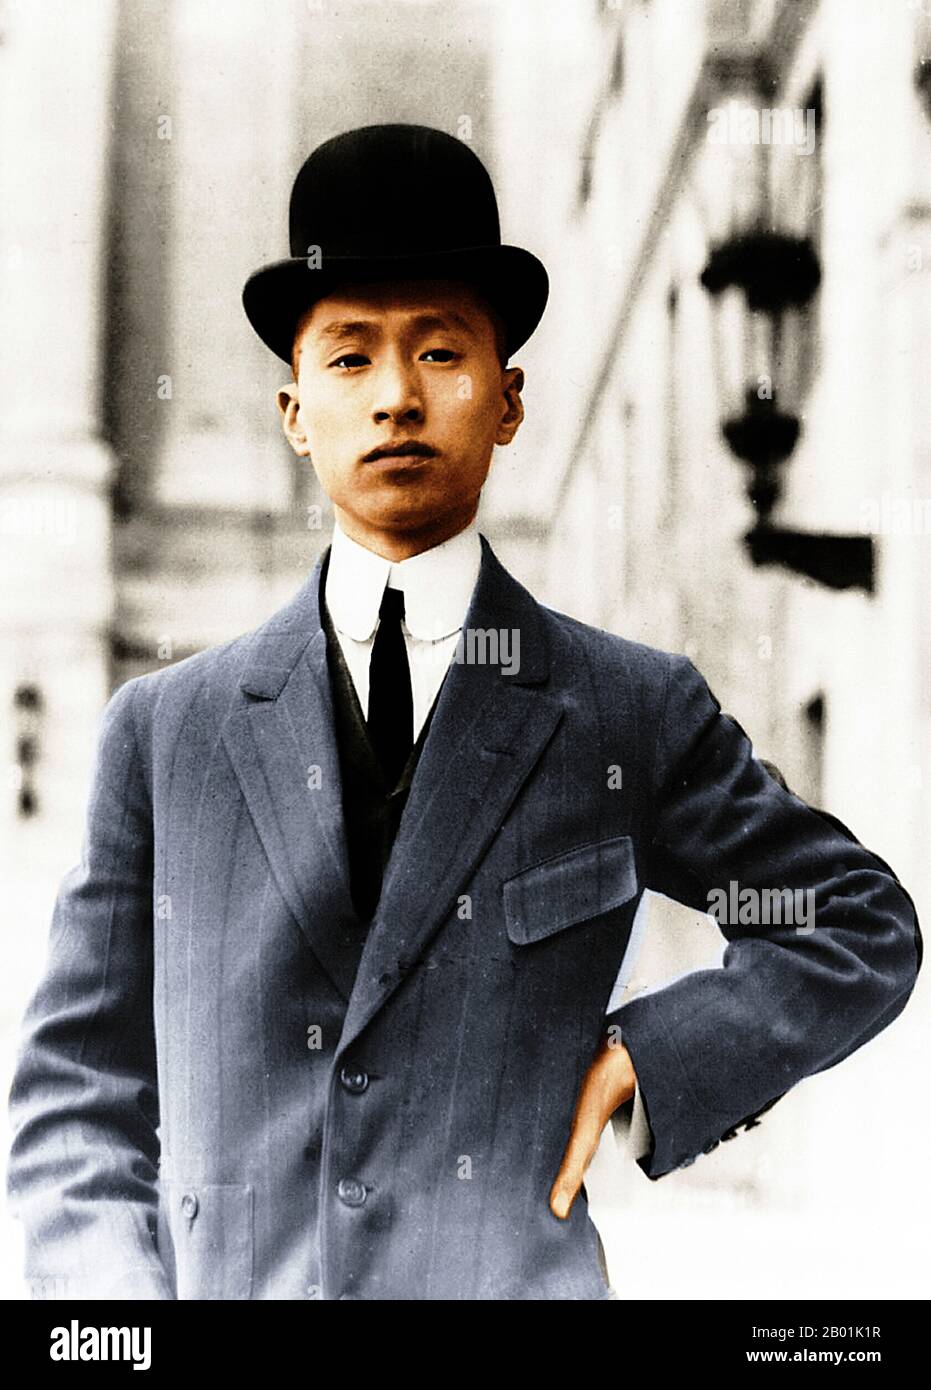 China: Guo Weijun or Wellington Koo (29 January 1887 - 14 November 1985), Premier of the Republic of China (2 July 1924 - 14 September 1924), 29 May 1912.  Koo Vi Kyuin or Ku Wei-chün, often known by the Western name V.K. Wellington Koo, was a prominent diplomat under the Republic of China, representative to the Paris Peace Conference of 1919, ambassador to France, Great Britain and the United States, participant in founding the League of Nations and the United Nations; and judge on the International Court of Justice at the Hague from 1957 to 1967. Stock Photo